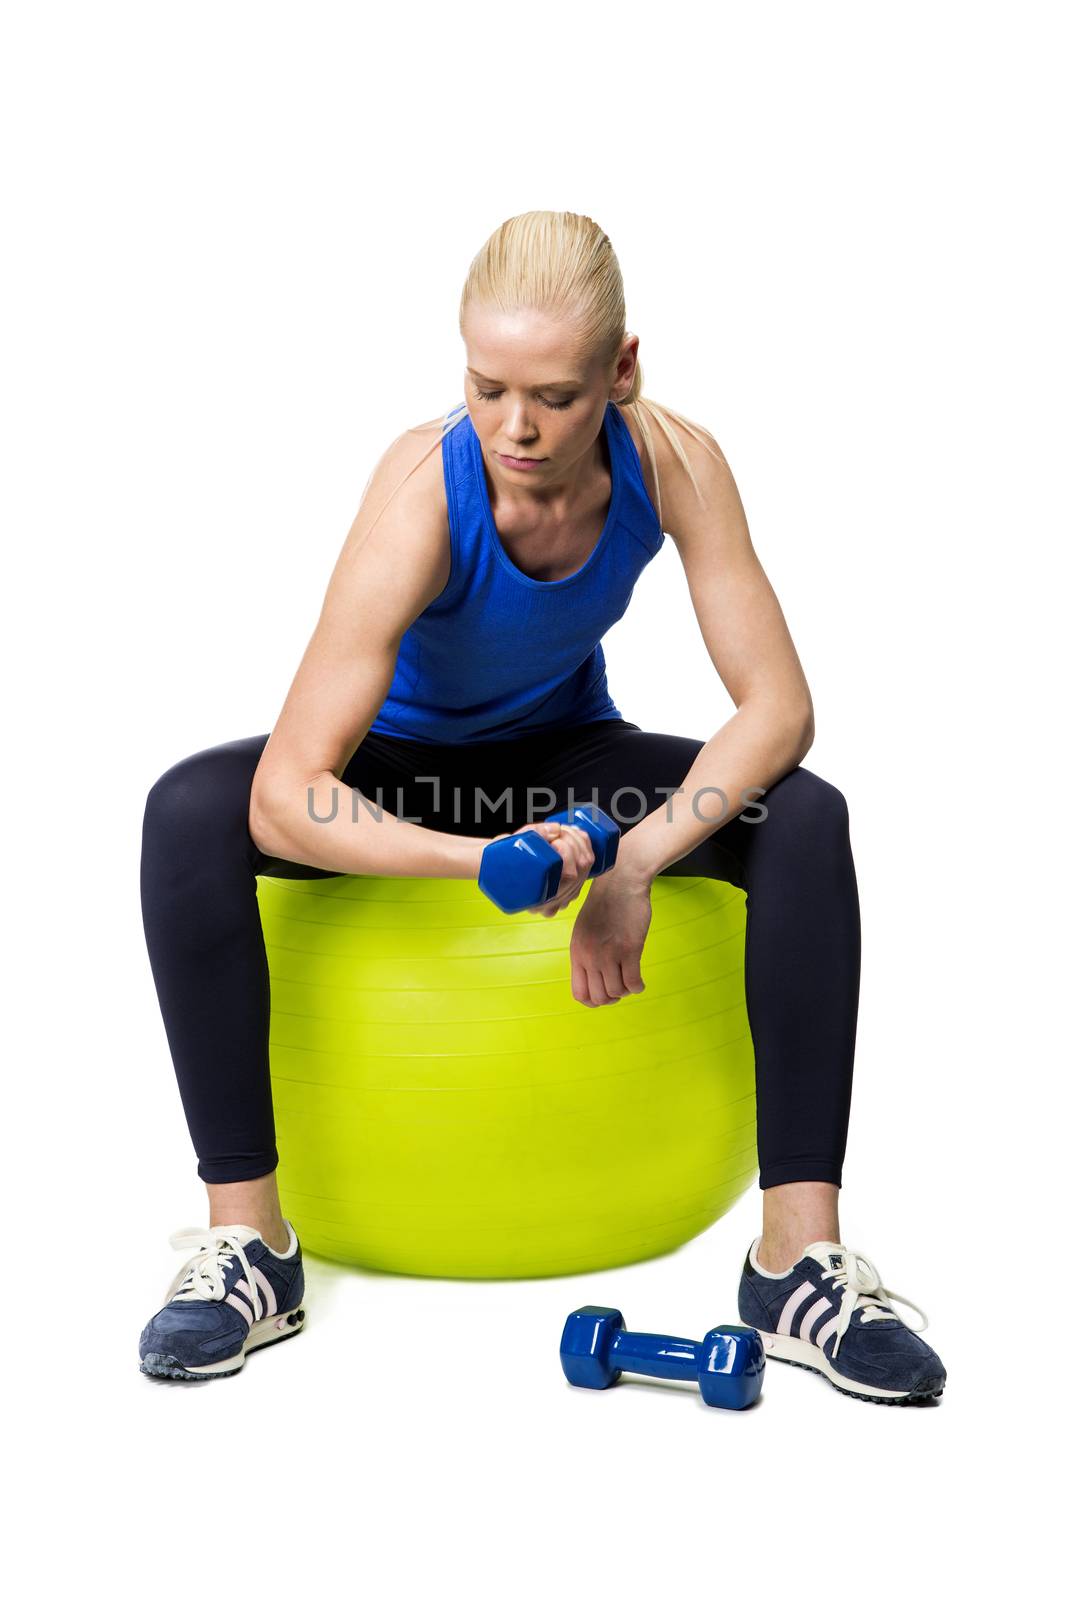 blonde woman exercising by Flareimage